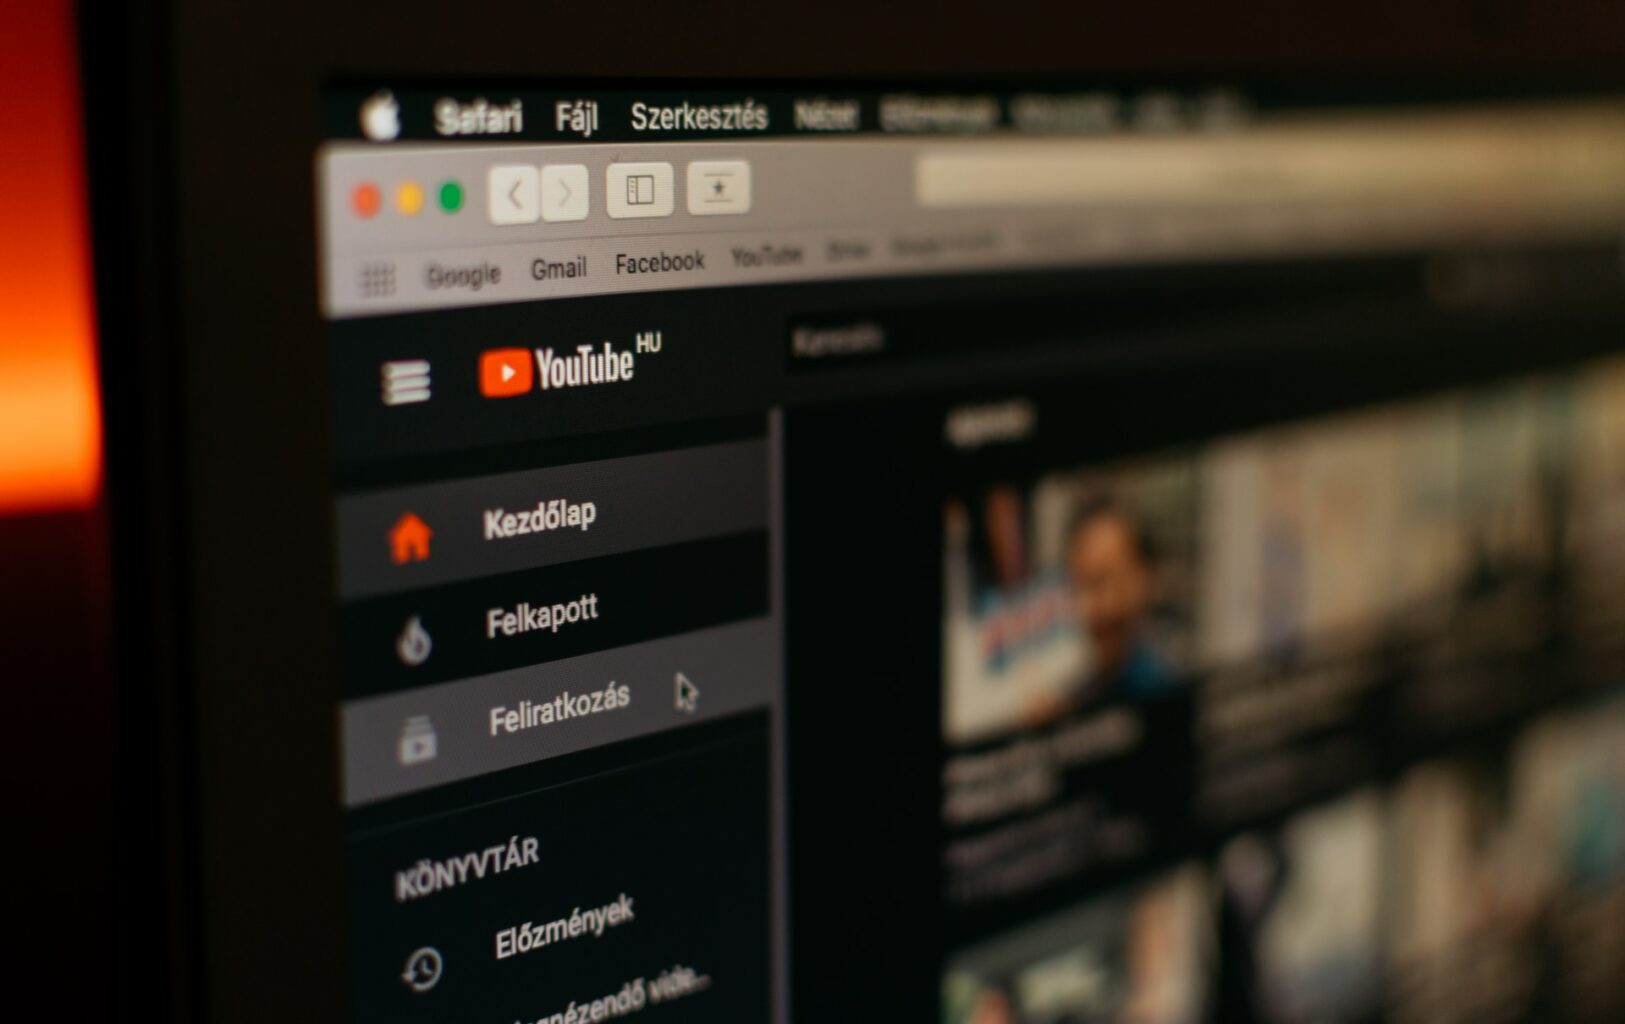 "Total Adblock is a great alternative for successfully blocking all advertisements in videos." Source: Unsplash